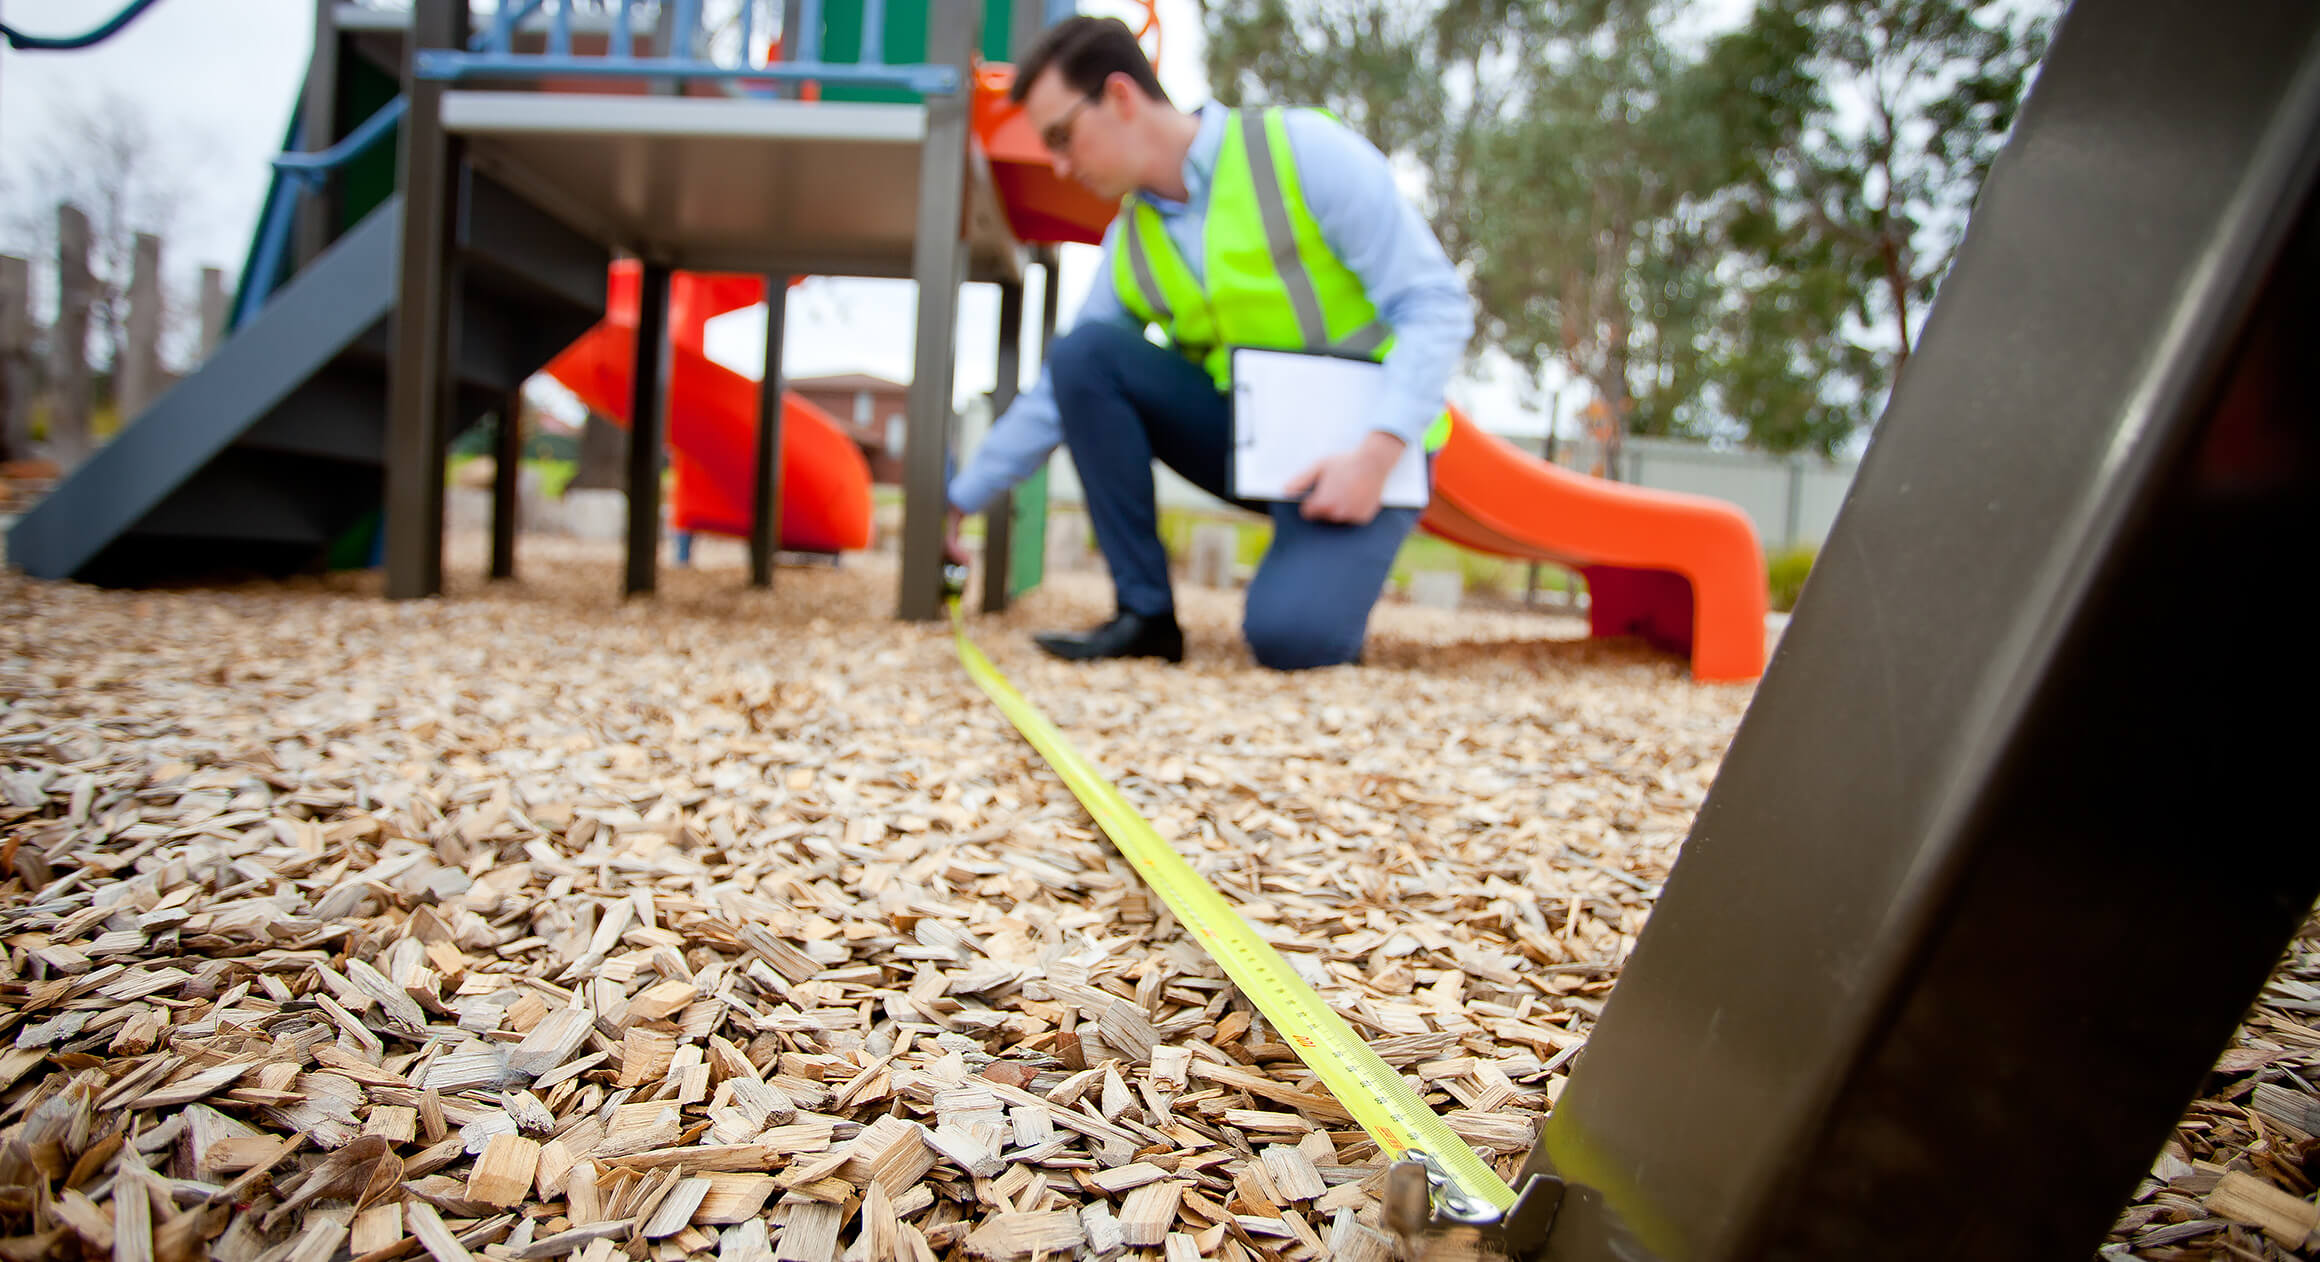 Playground Safety Assessments & Compliance Audits